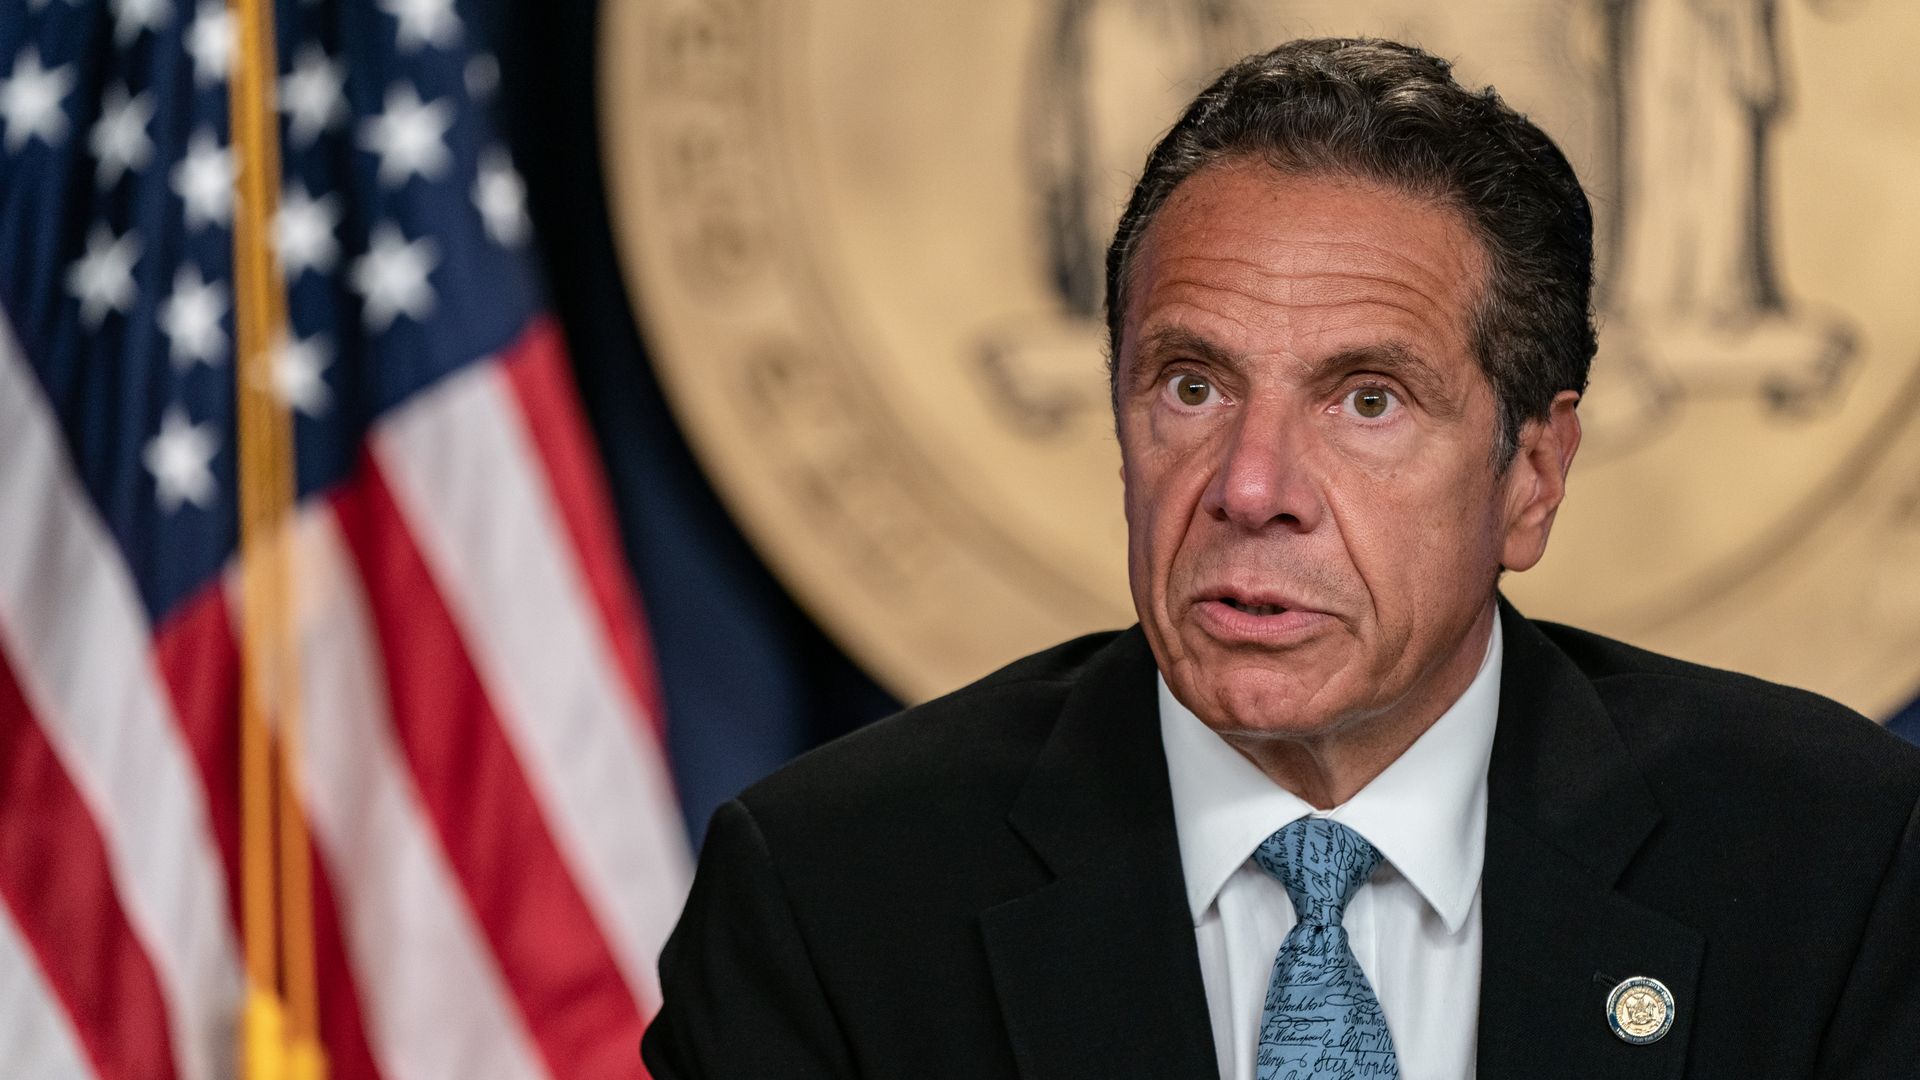 New York Gov. Andrew Cuomo speaks during the daily media briefing at the Office of the Governor of the State of New York on July 23